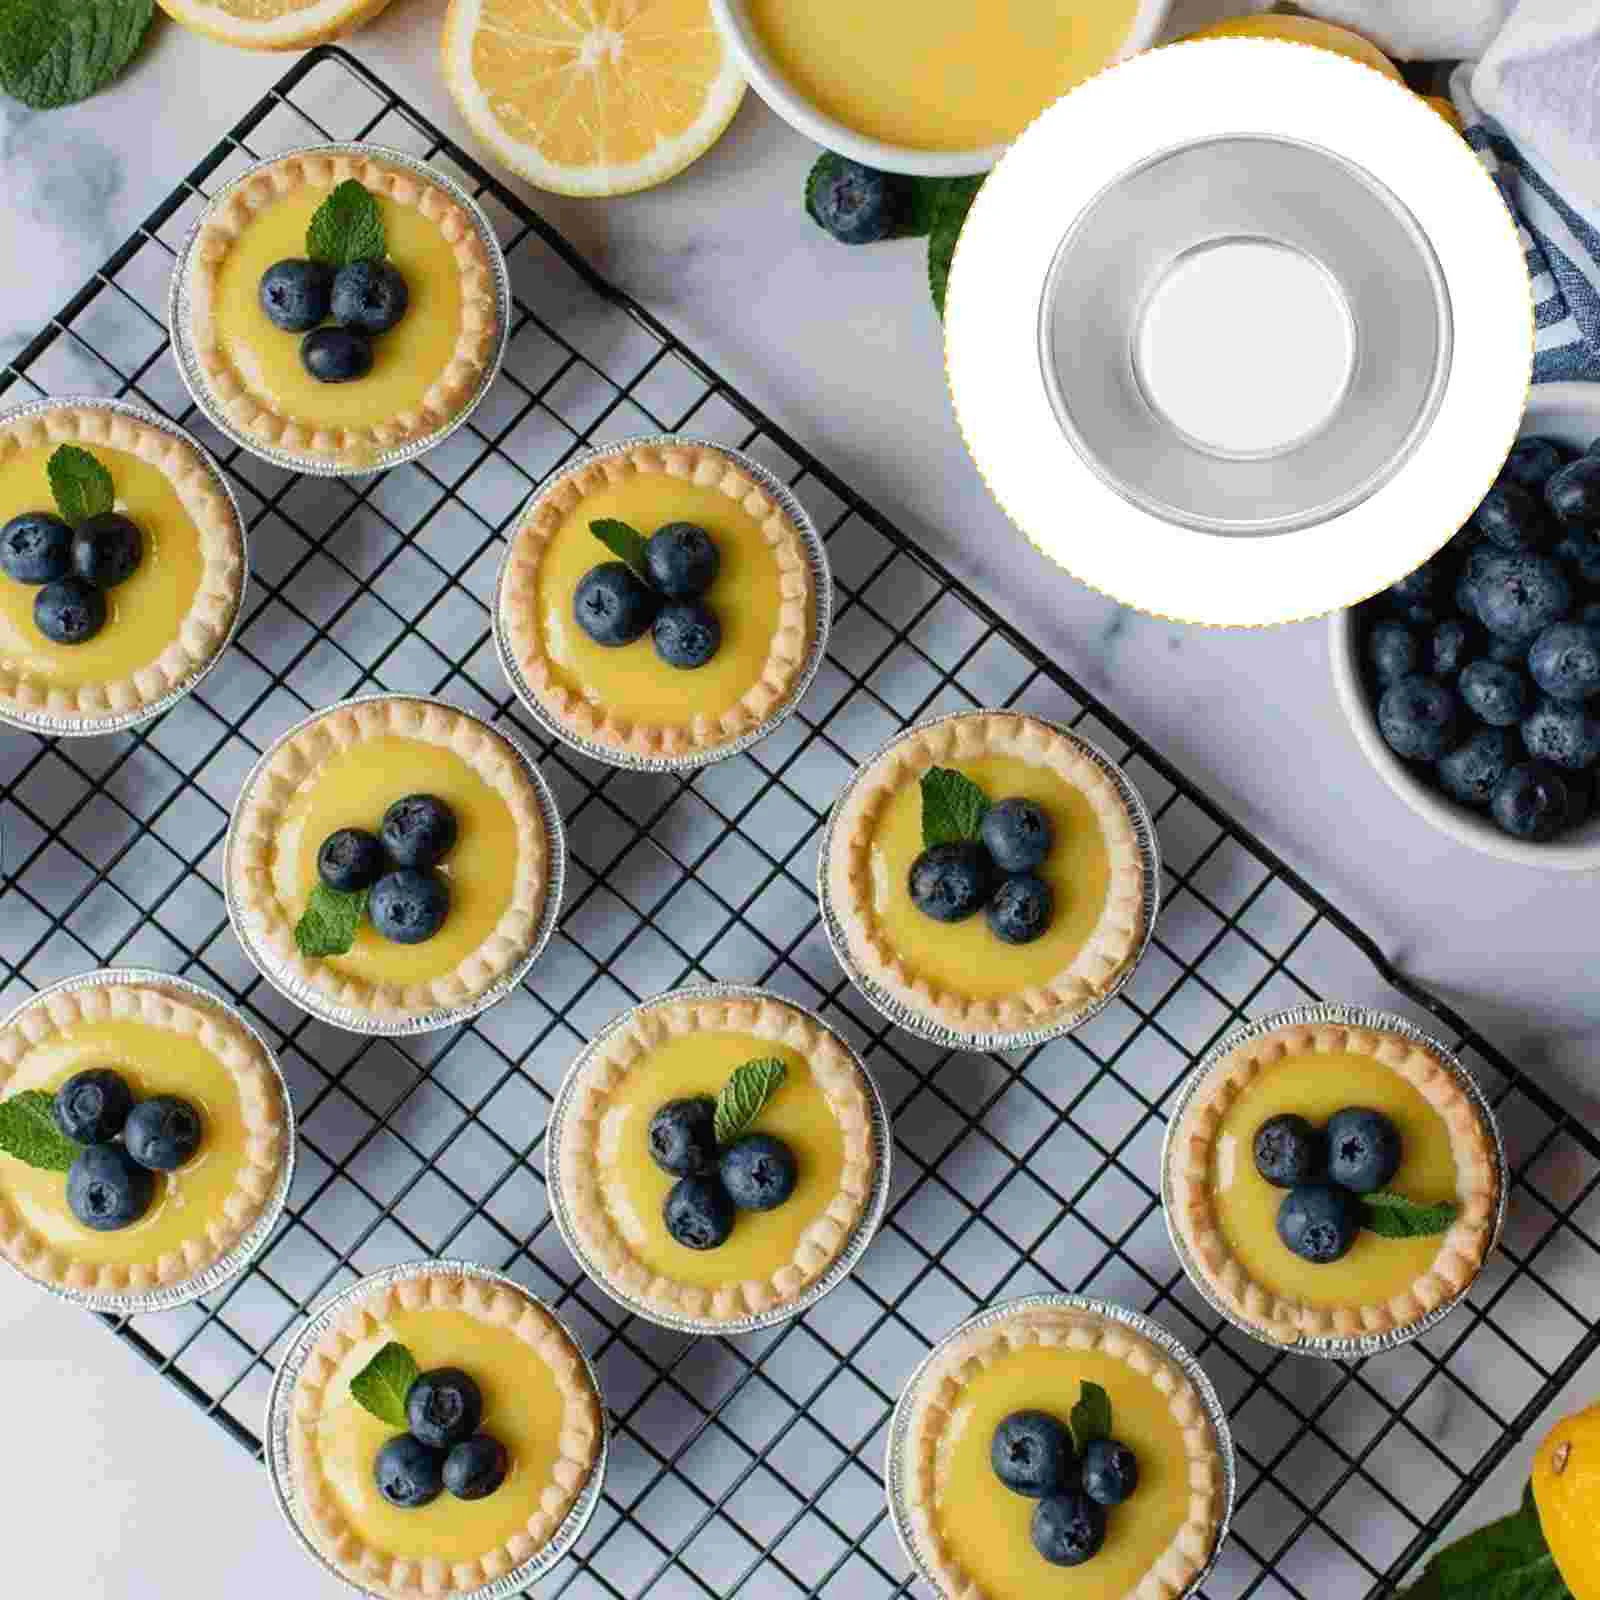 

Tart Egg Baking Pan Mini Molds Pans Pie Mold Muffin Tin Tins Cups Aluminumflower Cases Cupcake Moulds Mould Cake Bakeware Stick